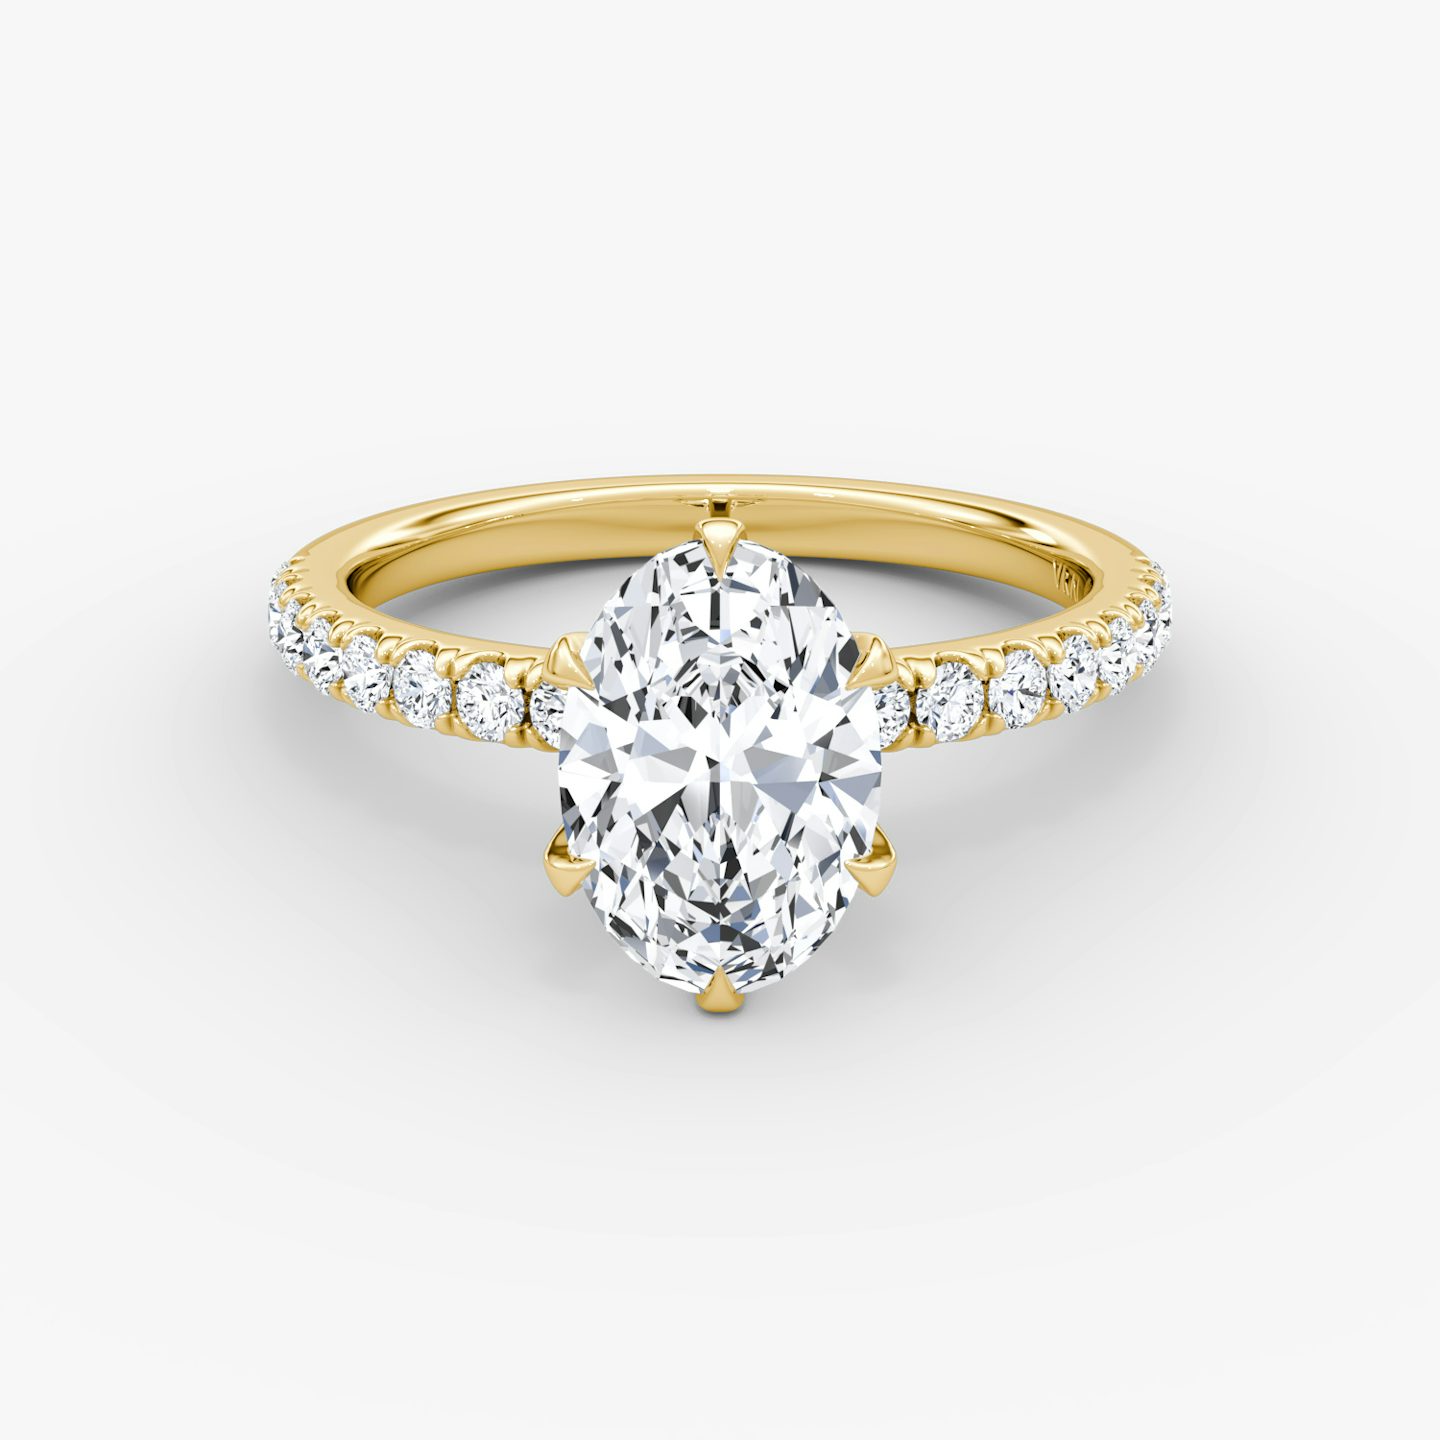 V | oval | 18k | yellow-gold | bandAccent: pave | diamondOrientation: vertical | caratWeight: other